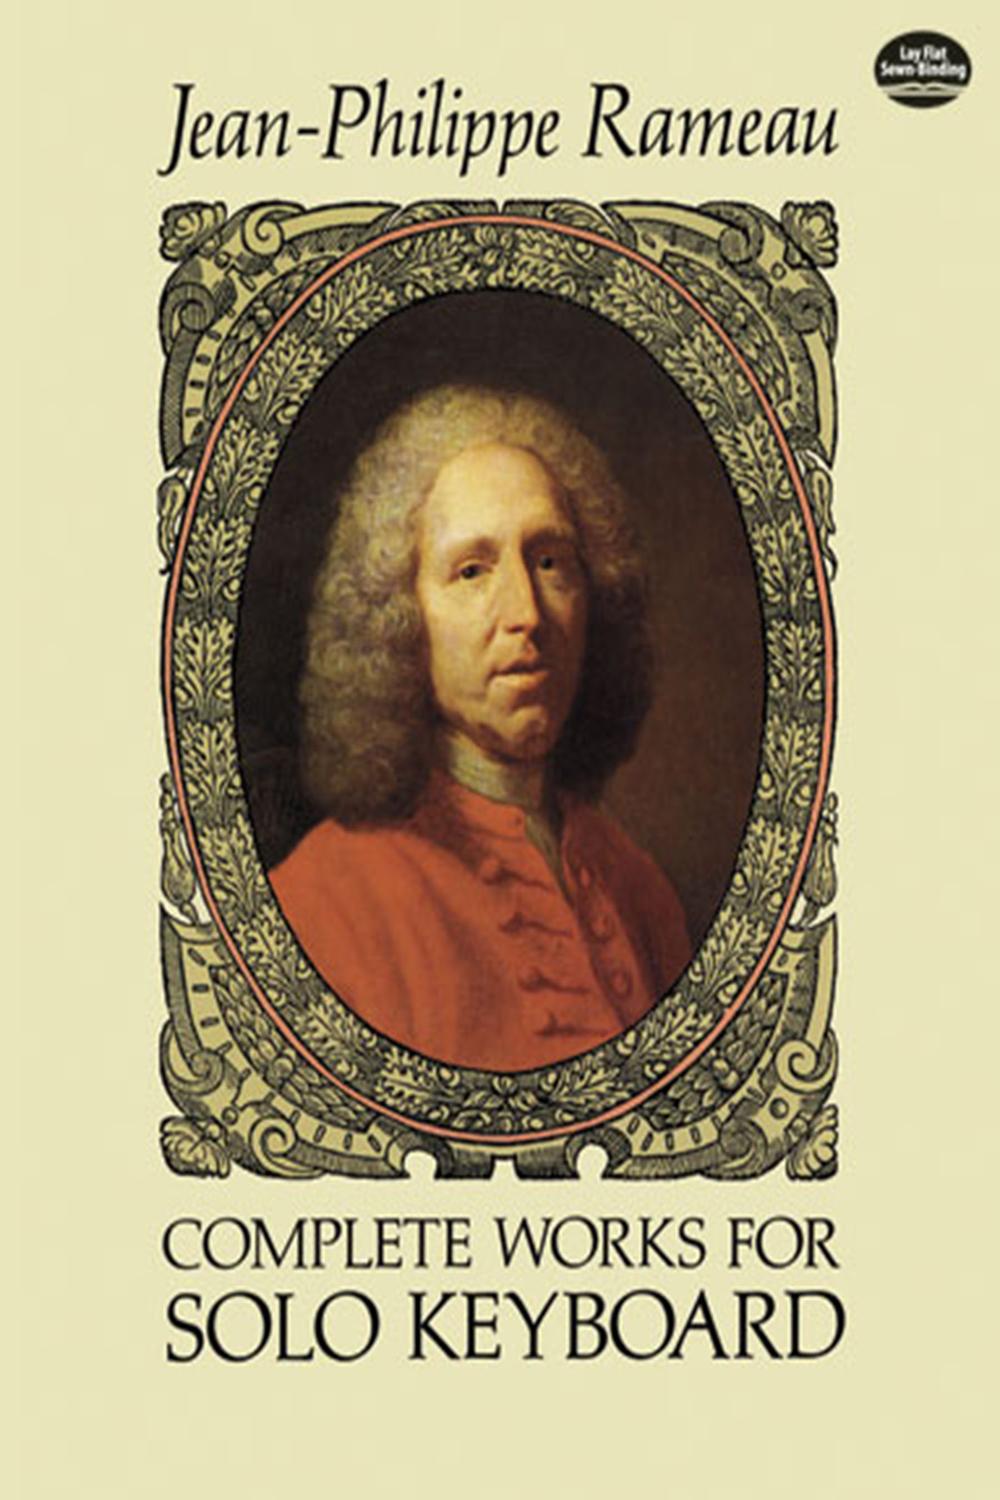 Complete Works for Solo Keyboard - Jean-Philippe Rameau